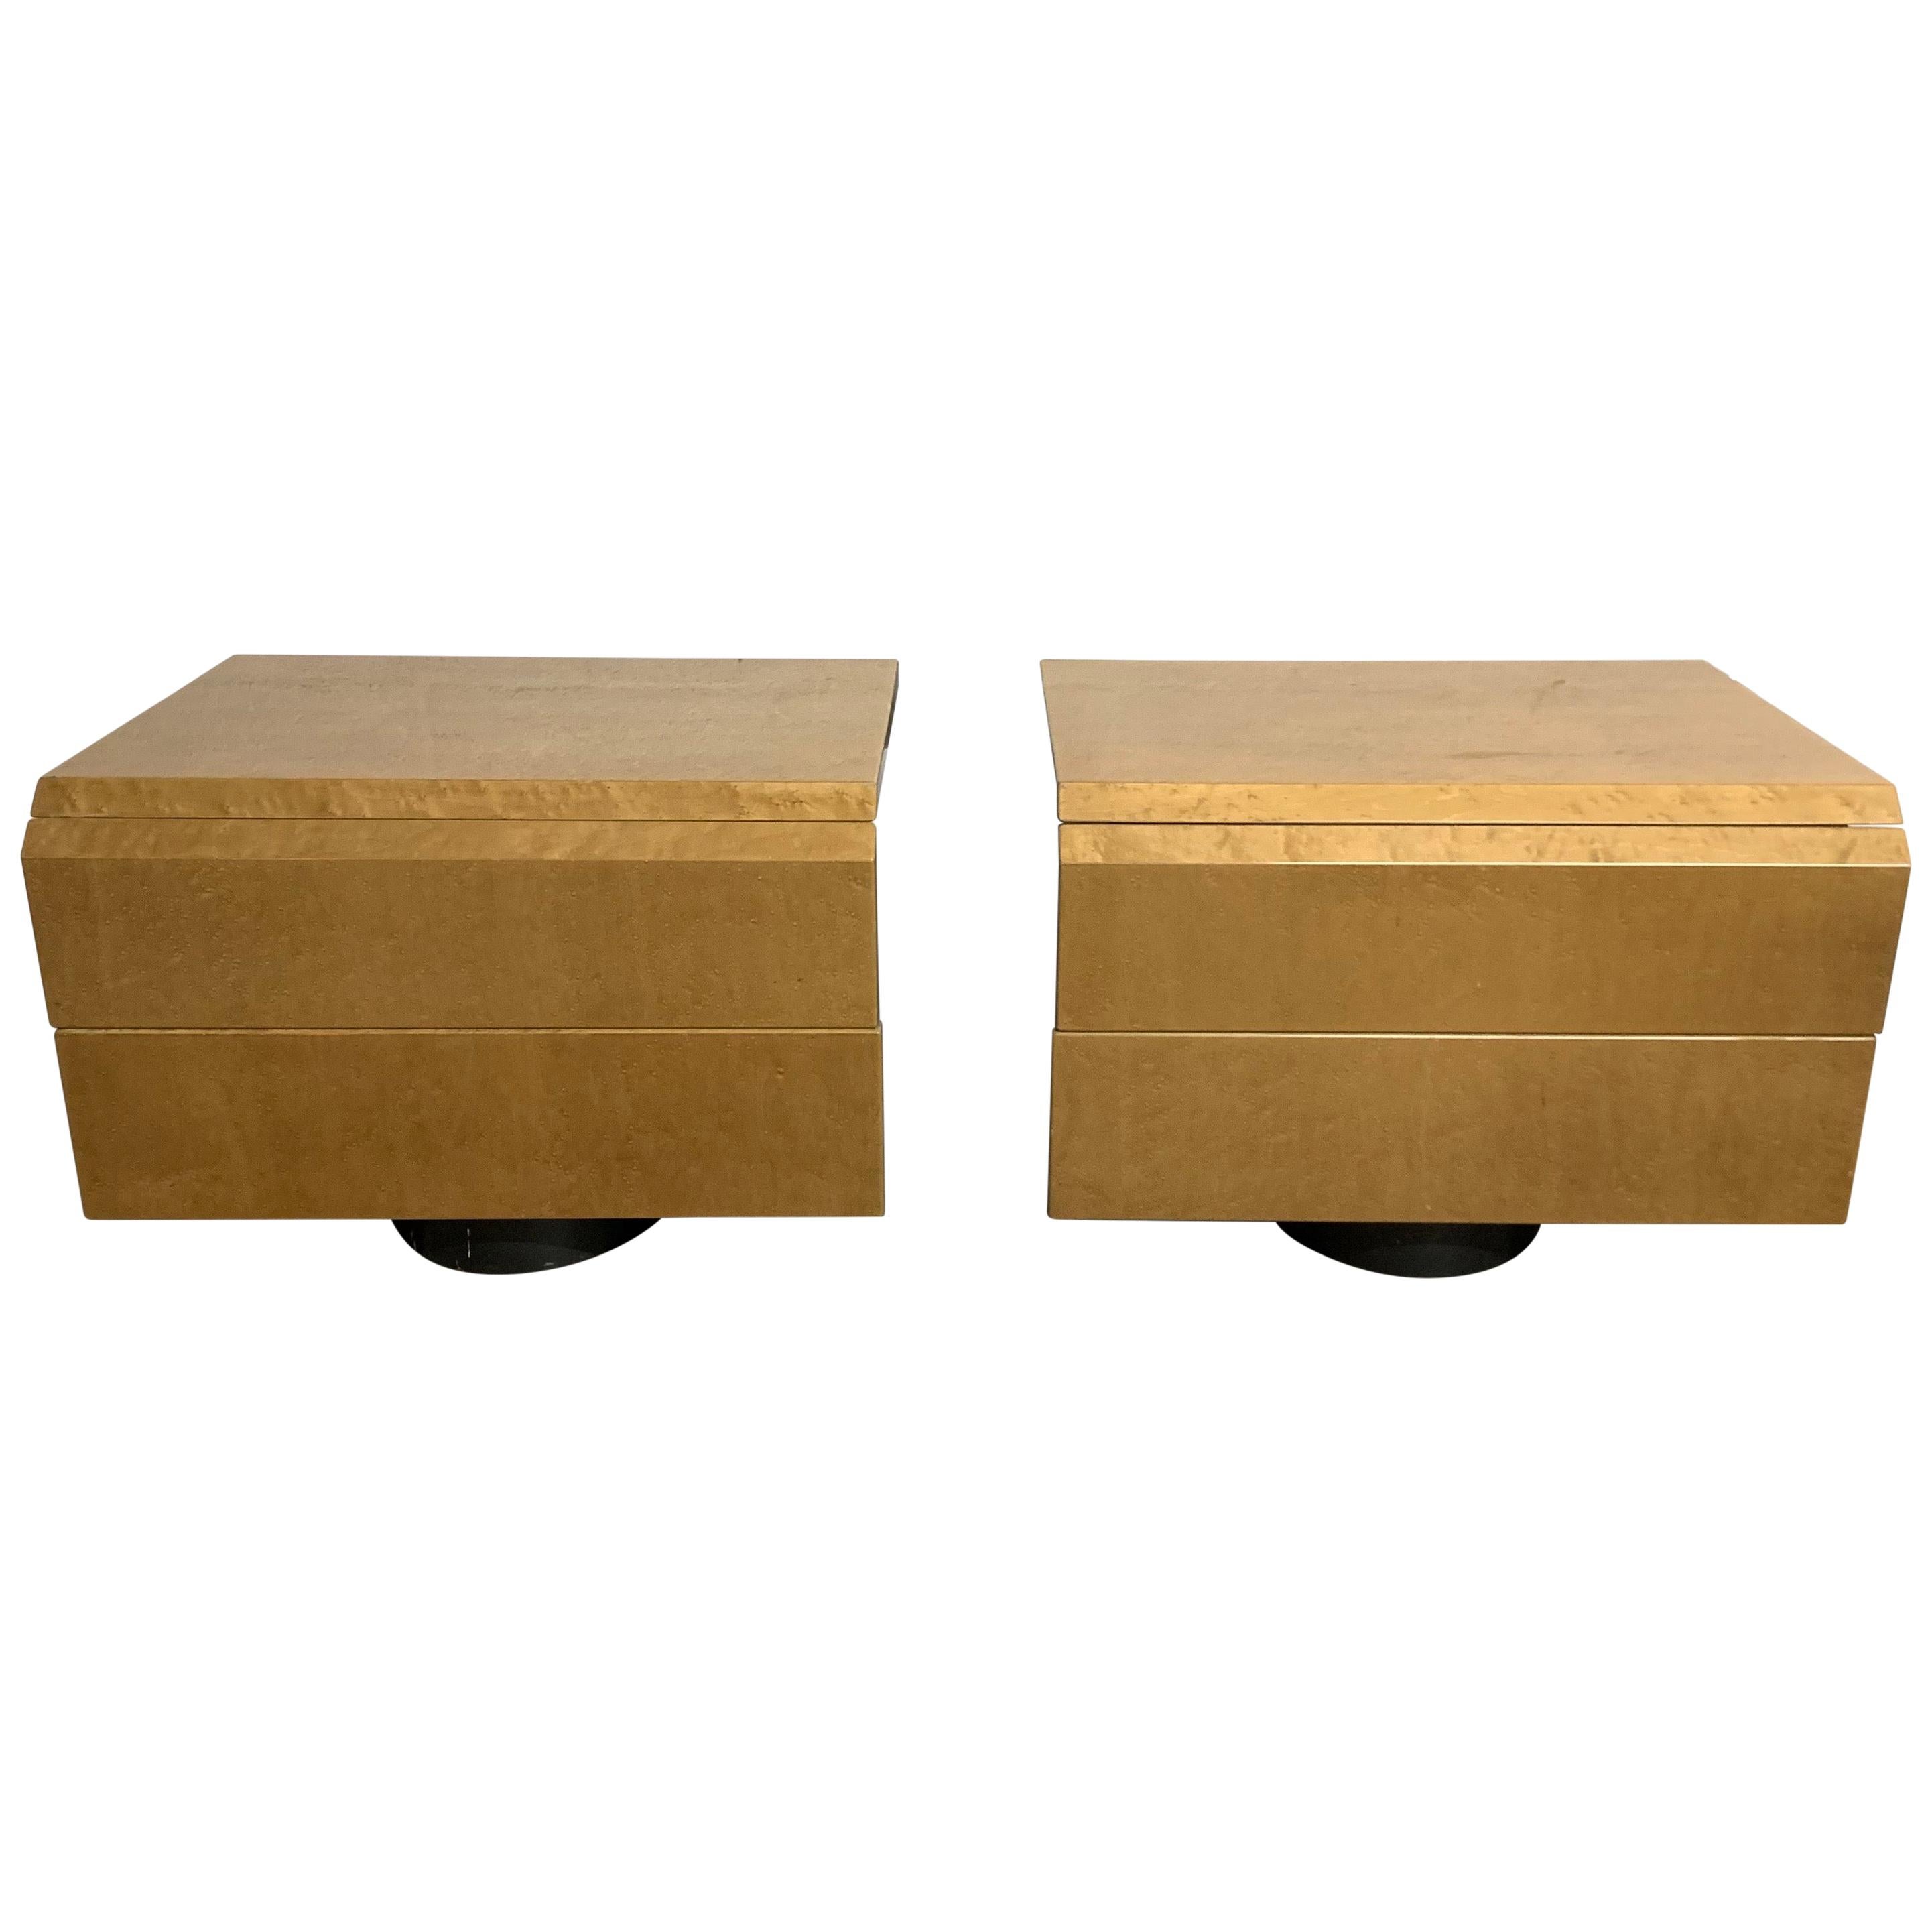 Pair of Giovanni Offredi Postmodern Nightstands or Bedside Tables for Saporiti